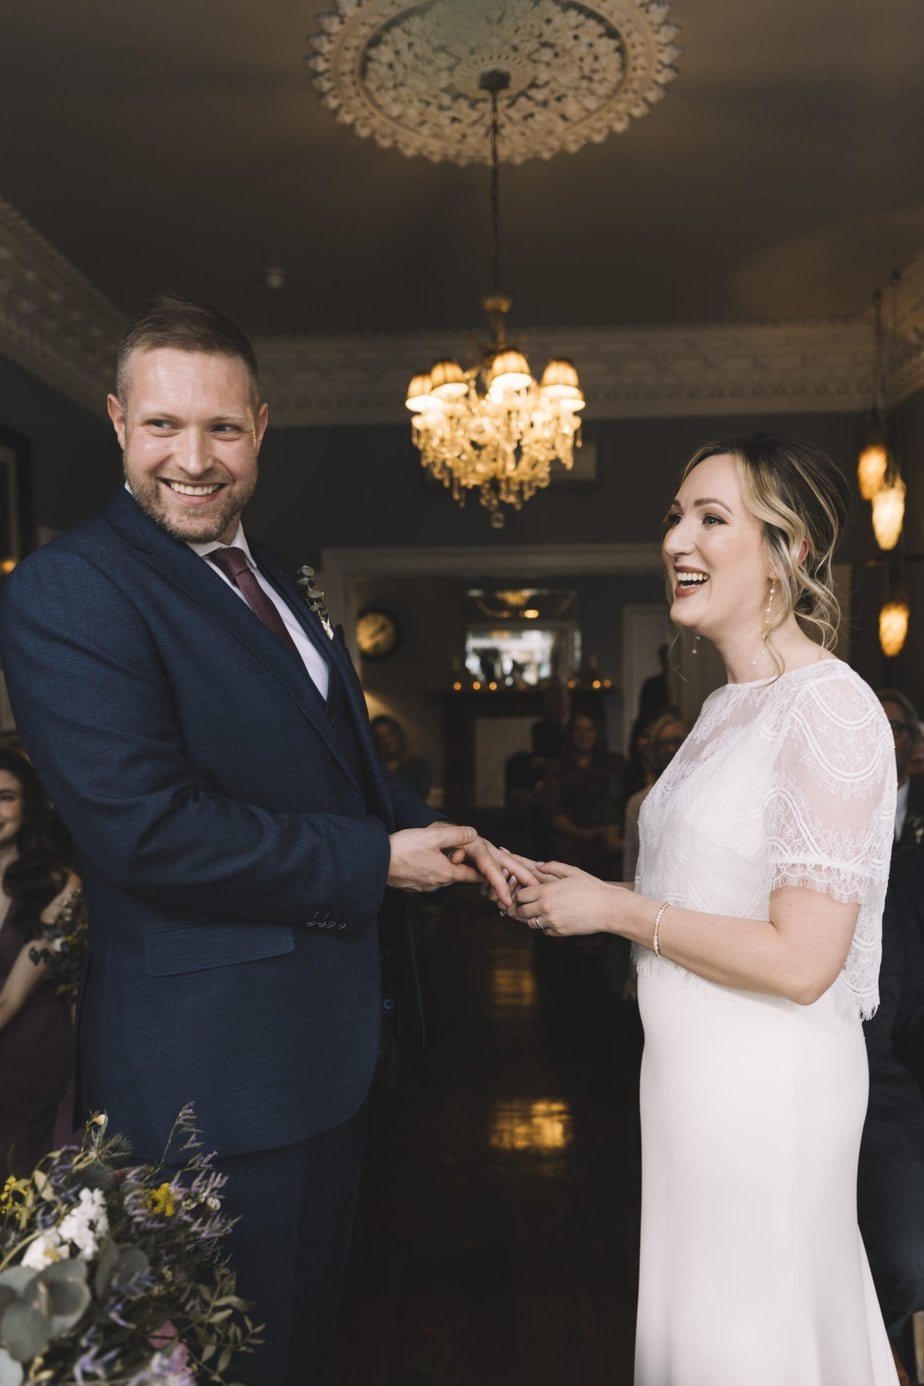 Couple holding hands and smiling during wedding ceremony at Didsbury House Hotel.